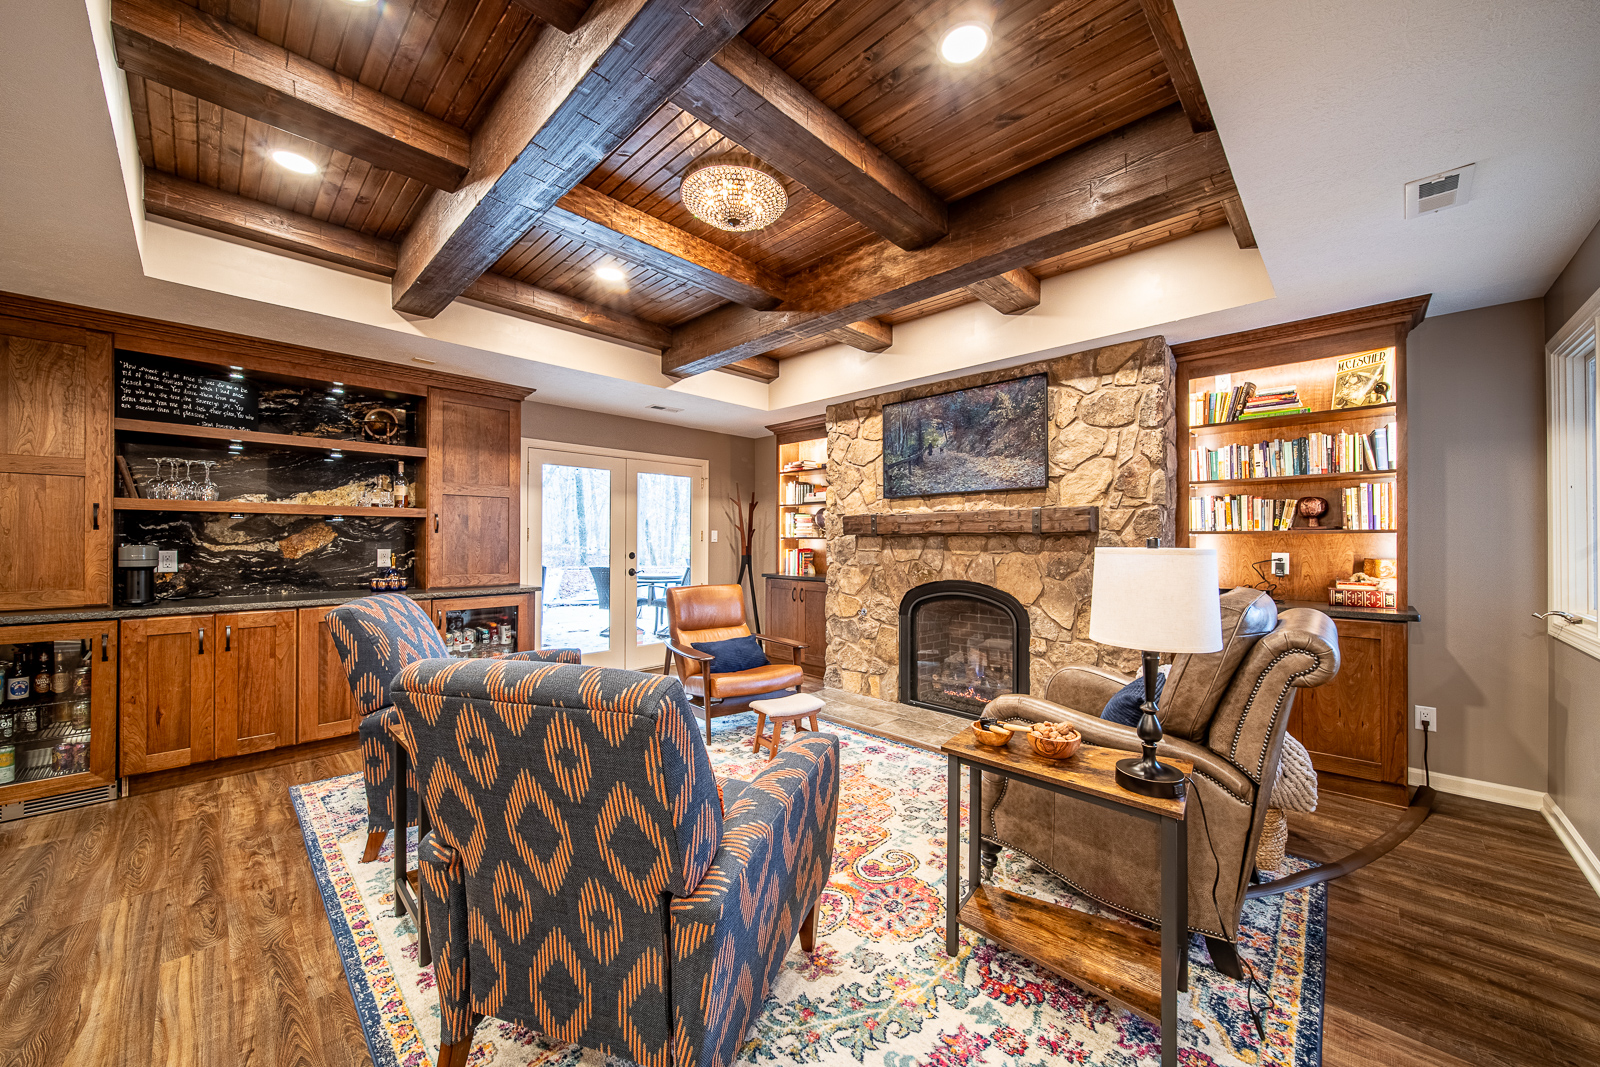 Cozy sitting area in rustic basement remodel with fireplace and tray ceiling with wood beams.